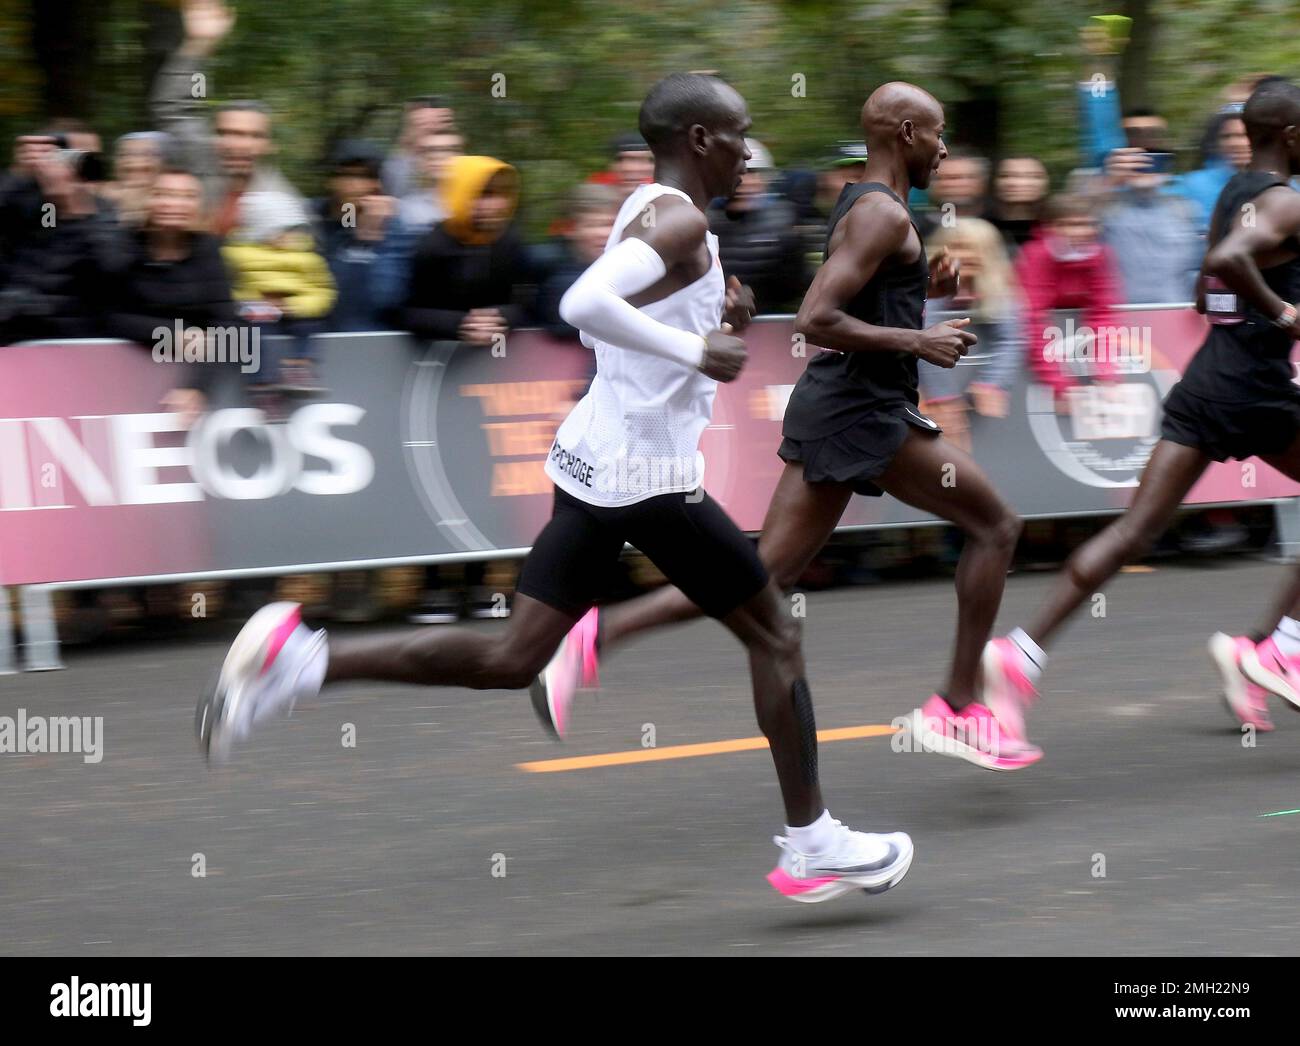 In this Oct. 12, 2019 photo, marathon runner Eliud Kipchoge from Kenya,  white vest, wearing Nike AlphaFly prototype running shoe, and his  pacemaking team, wearing pink Nike Vaporfly shoes, run during the